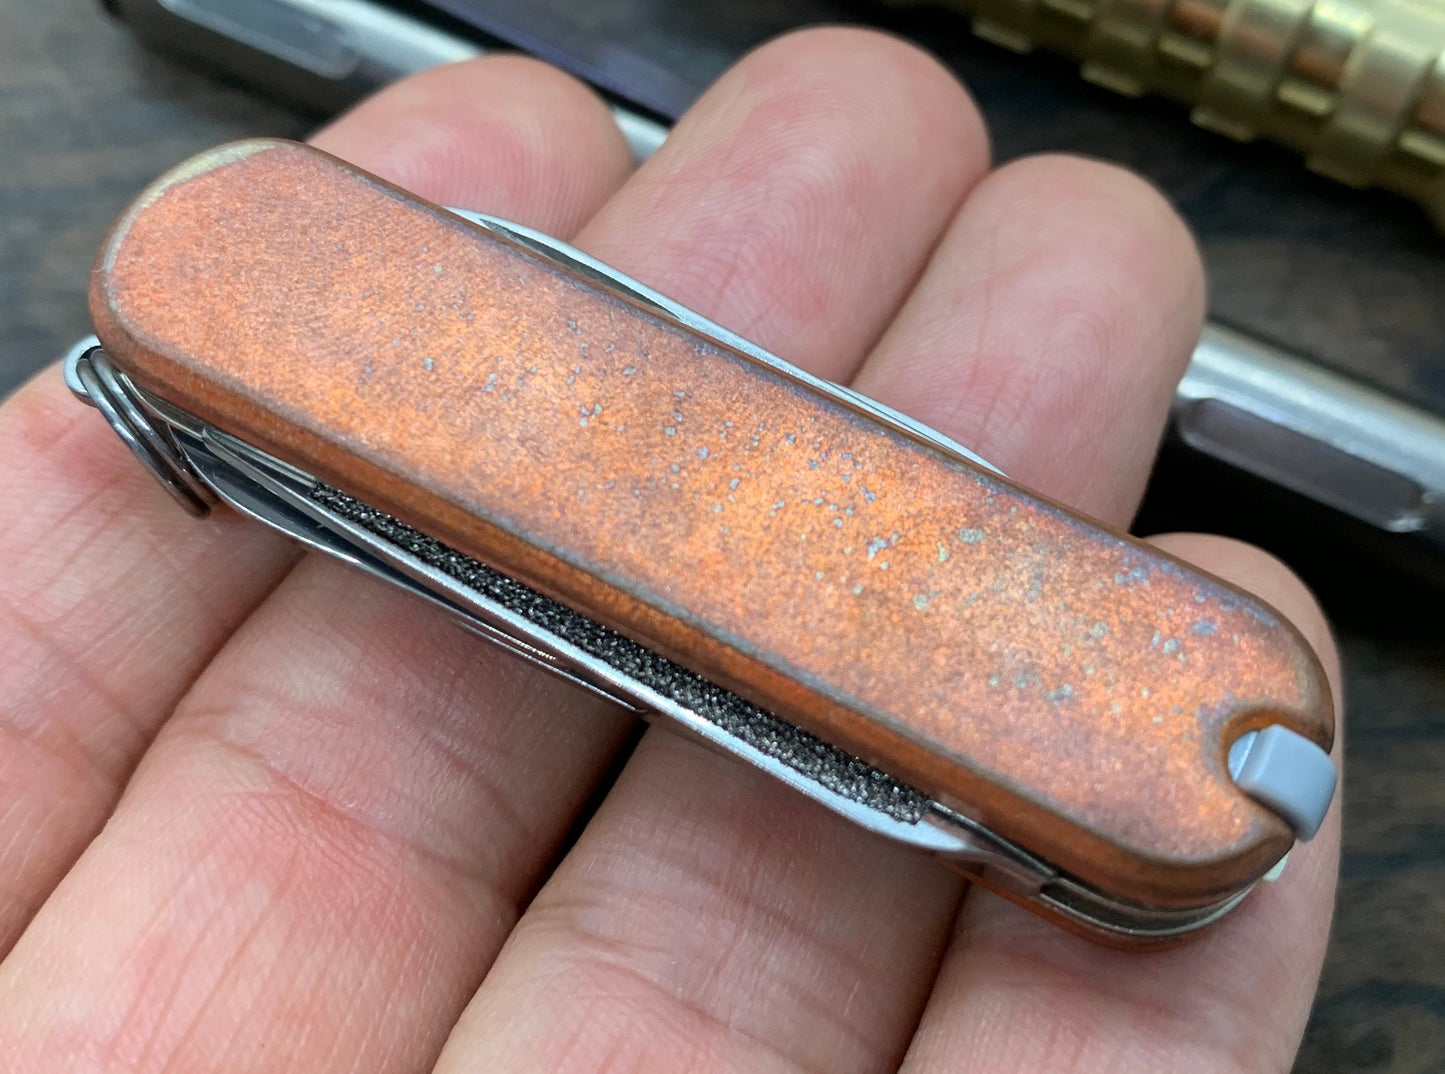 58mm Tumbled Copper Scales for Swiss Army SAK